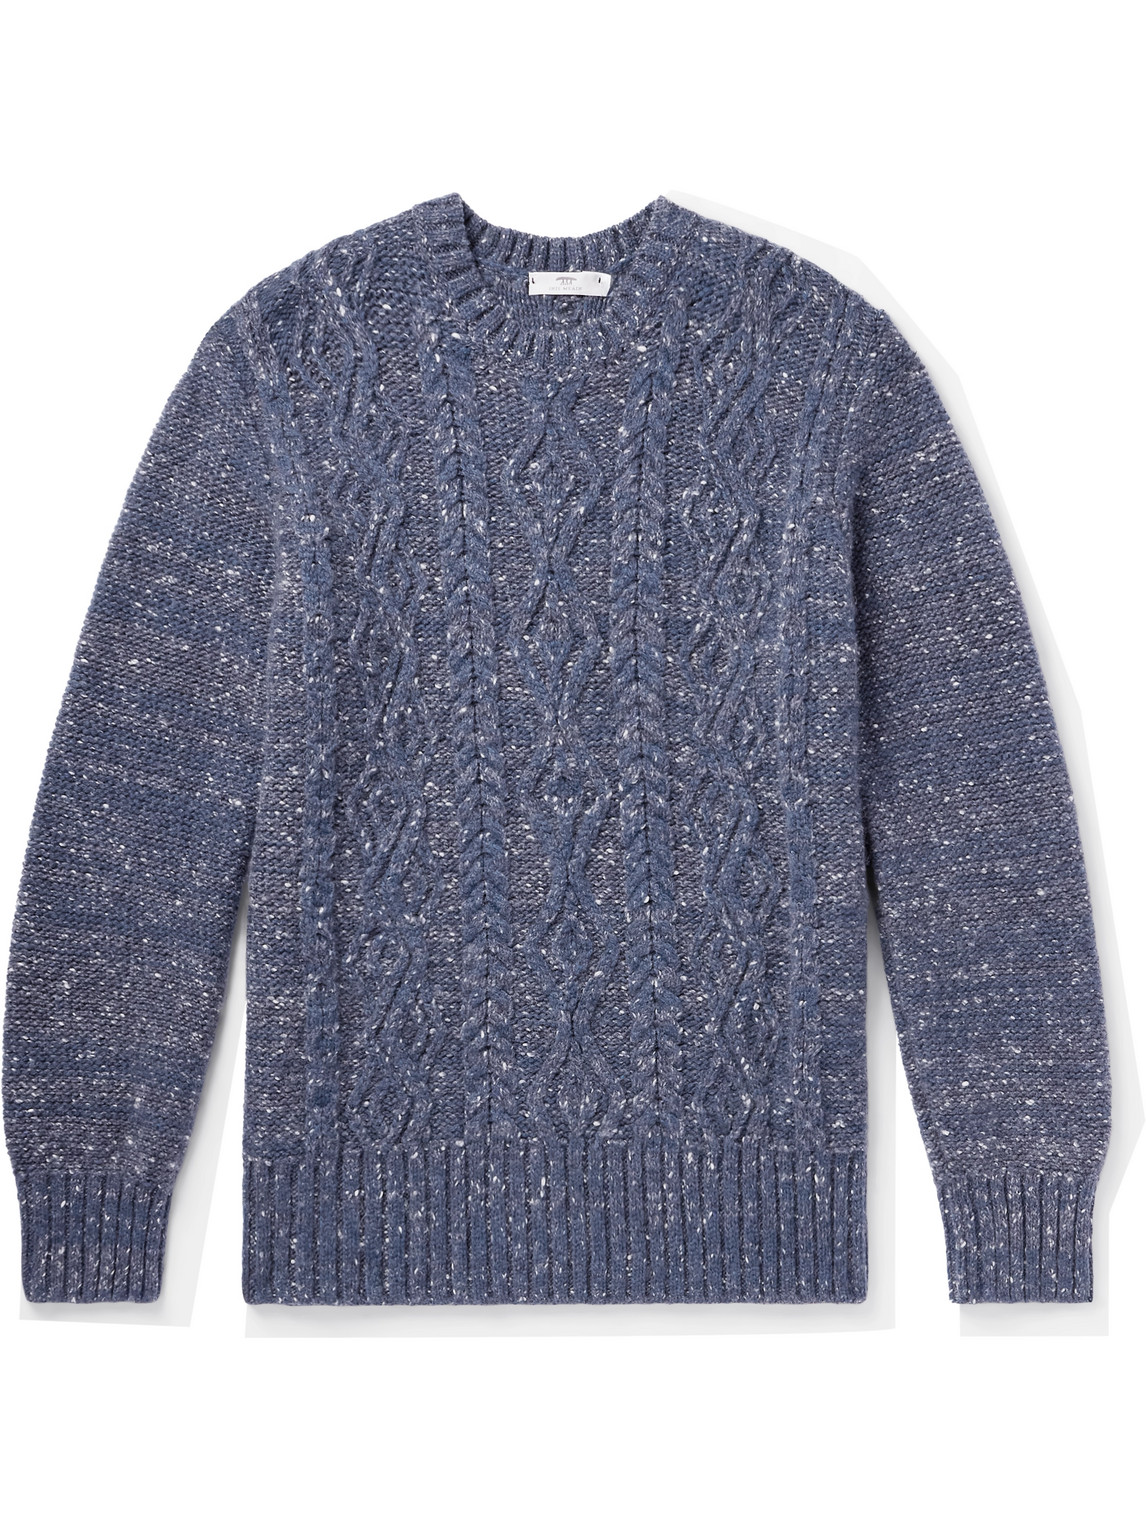 Inis Meain Aran Cable-knit Cashmere Sweater In Blue